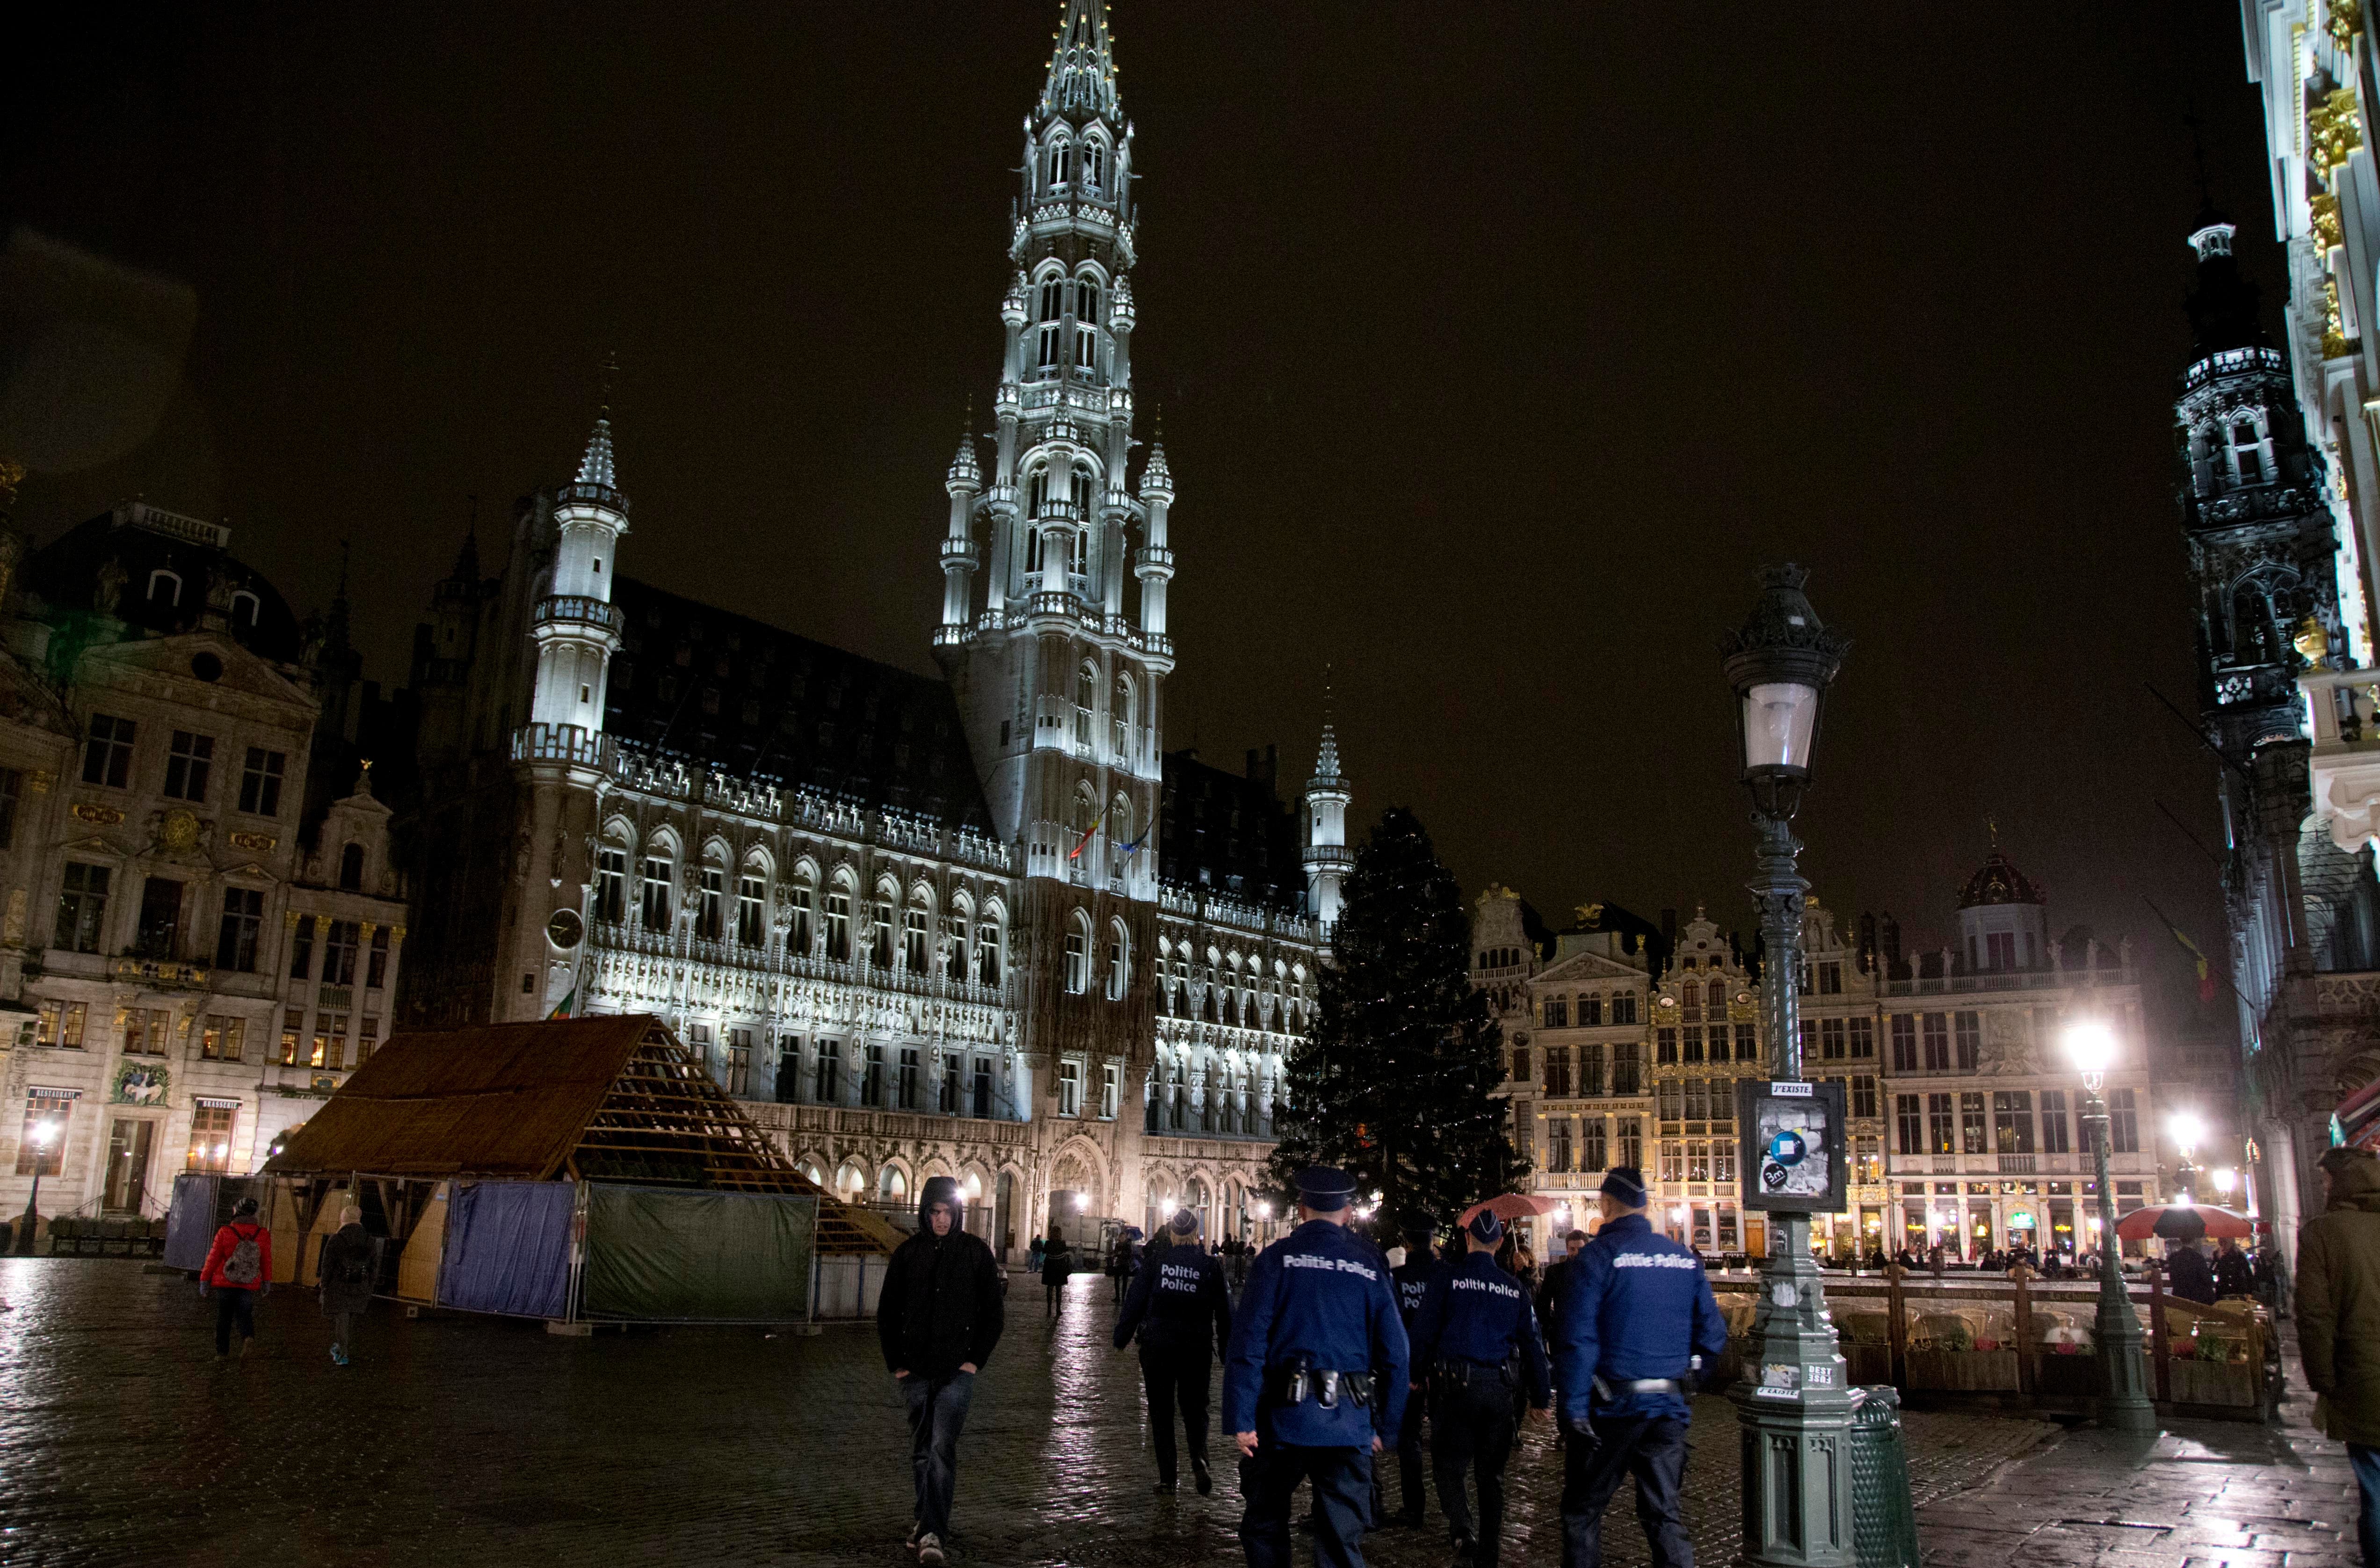  Police patrol in the Grand Place in the center of Brussels on Saturday, Nov. 21, 2015. Belgium raised its security level to the highest degree on Saturday as the manhunt continues for extremist Salah Abdeslam who took part in the Paris attacks. The security alert shut metro's, shops, and cancelled events with high concentrations of people. (AP Photo/Virginia Mayo)